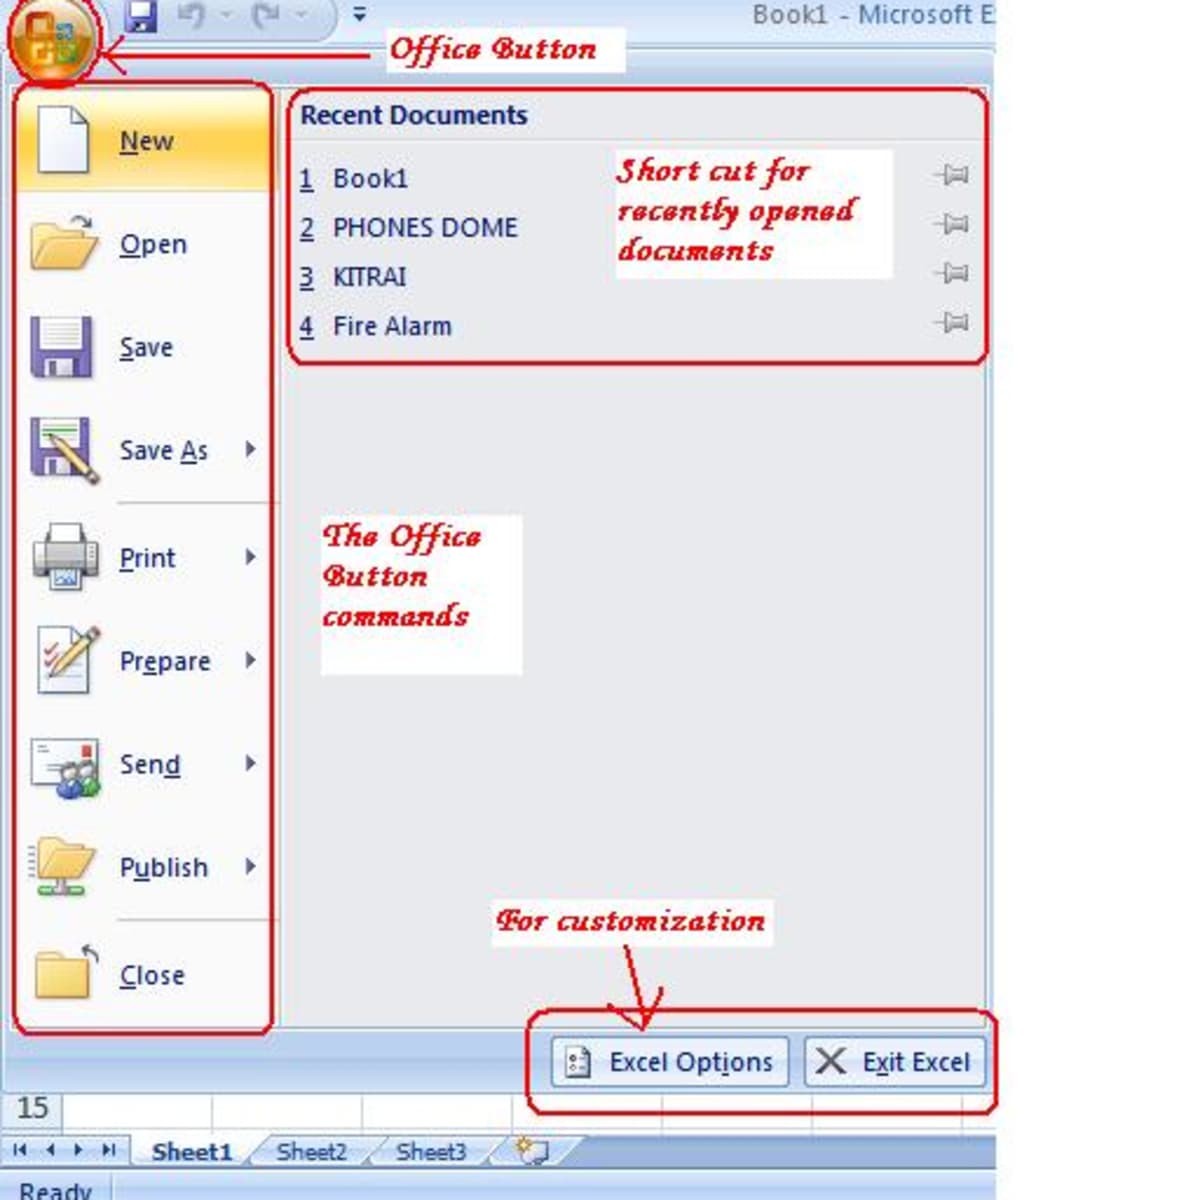 Open any Office 2007 program, such as Word or Excel.
Click on the Office button in the top-left corner of the program window.